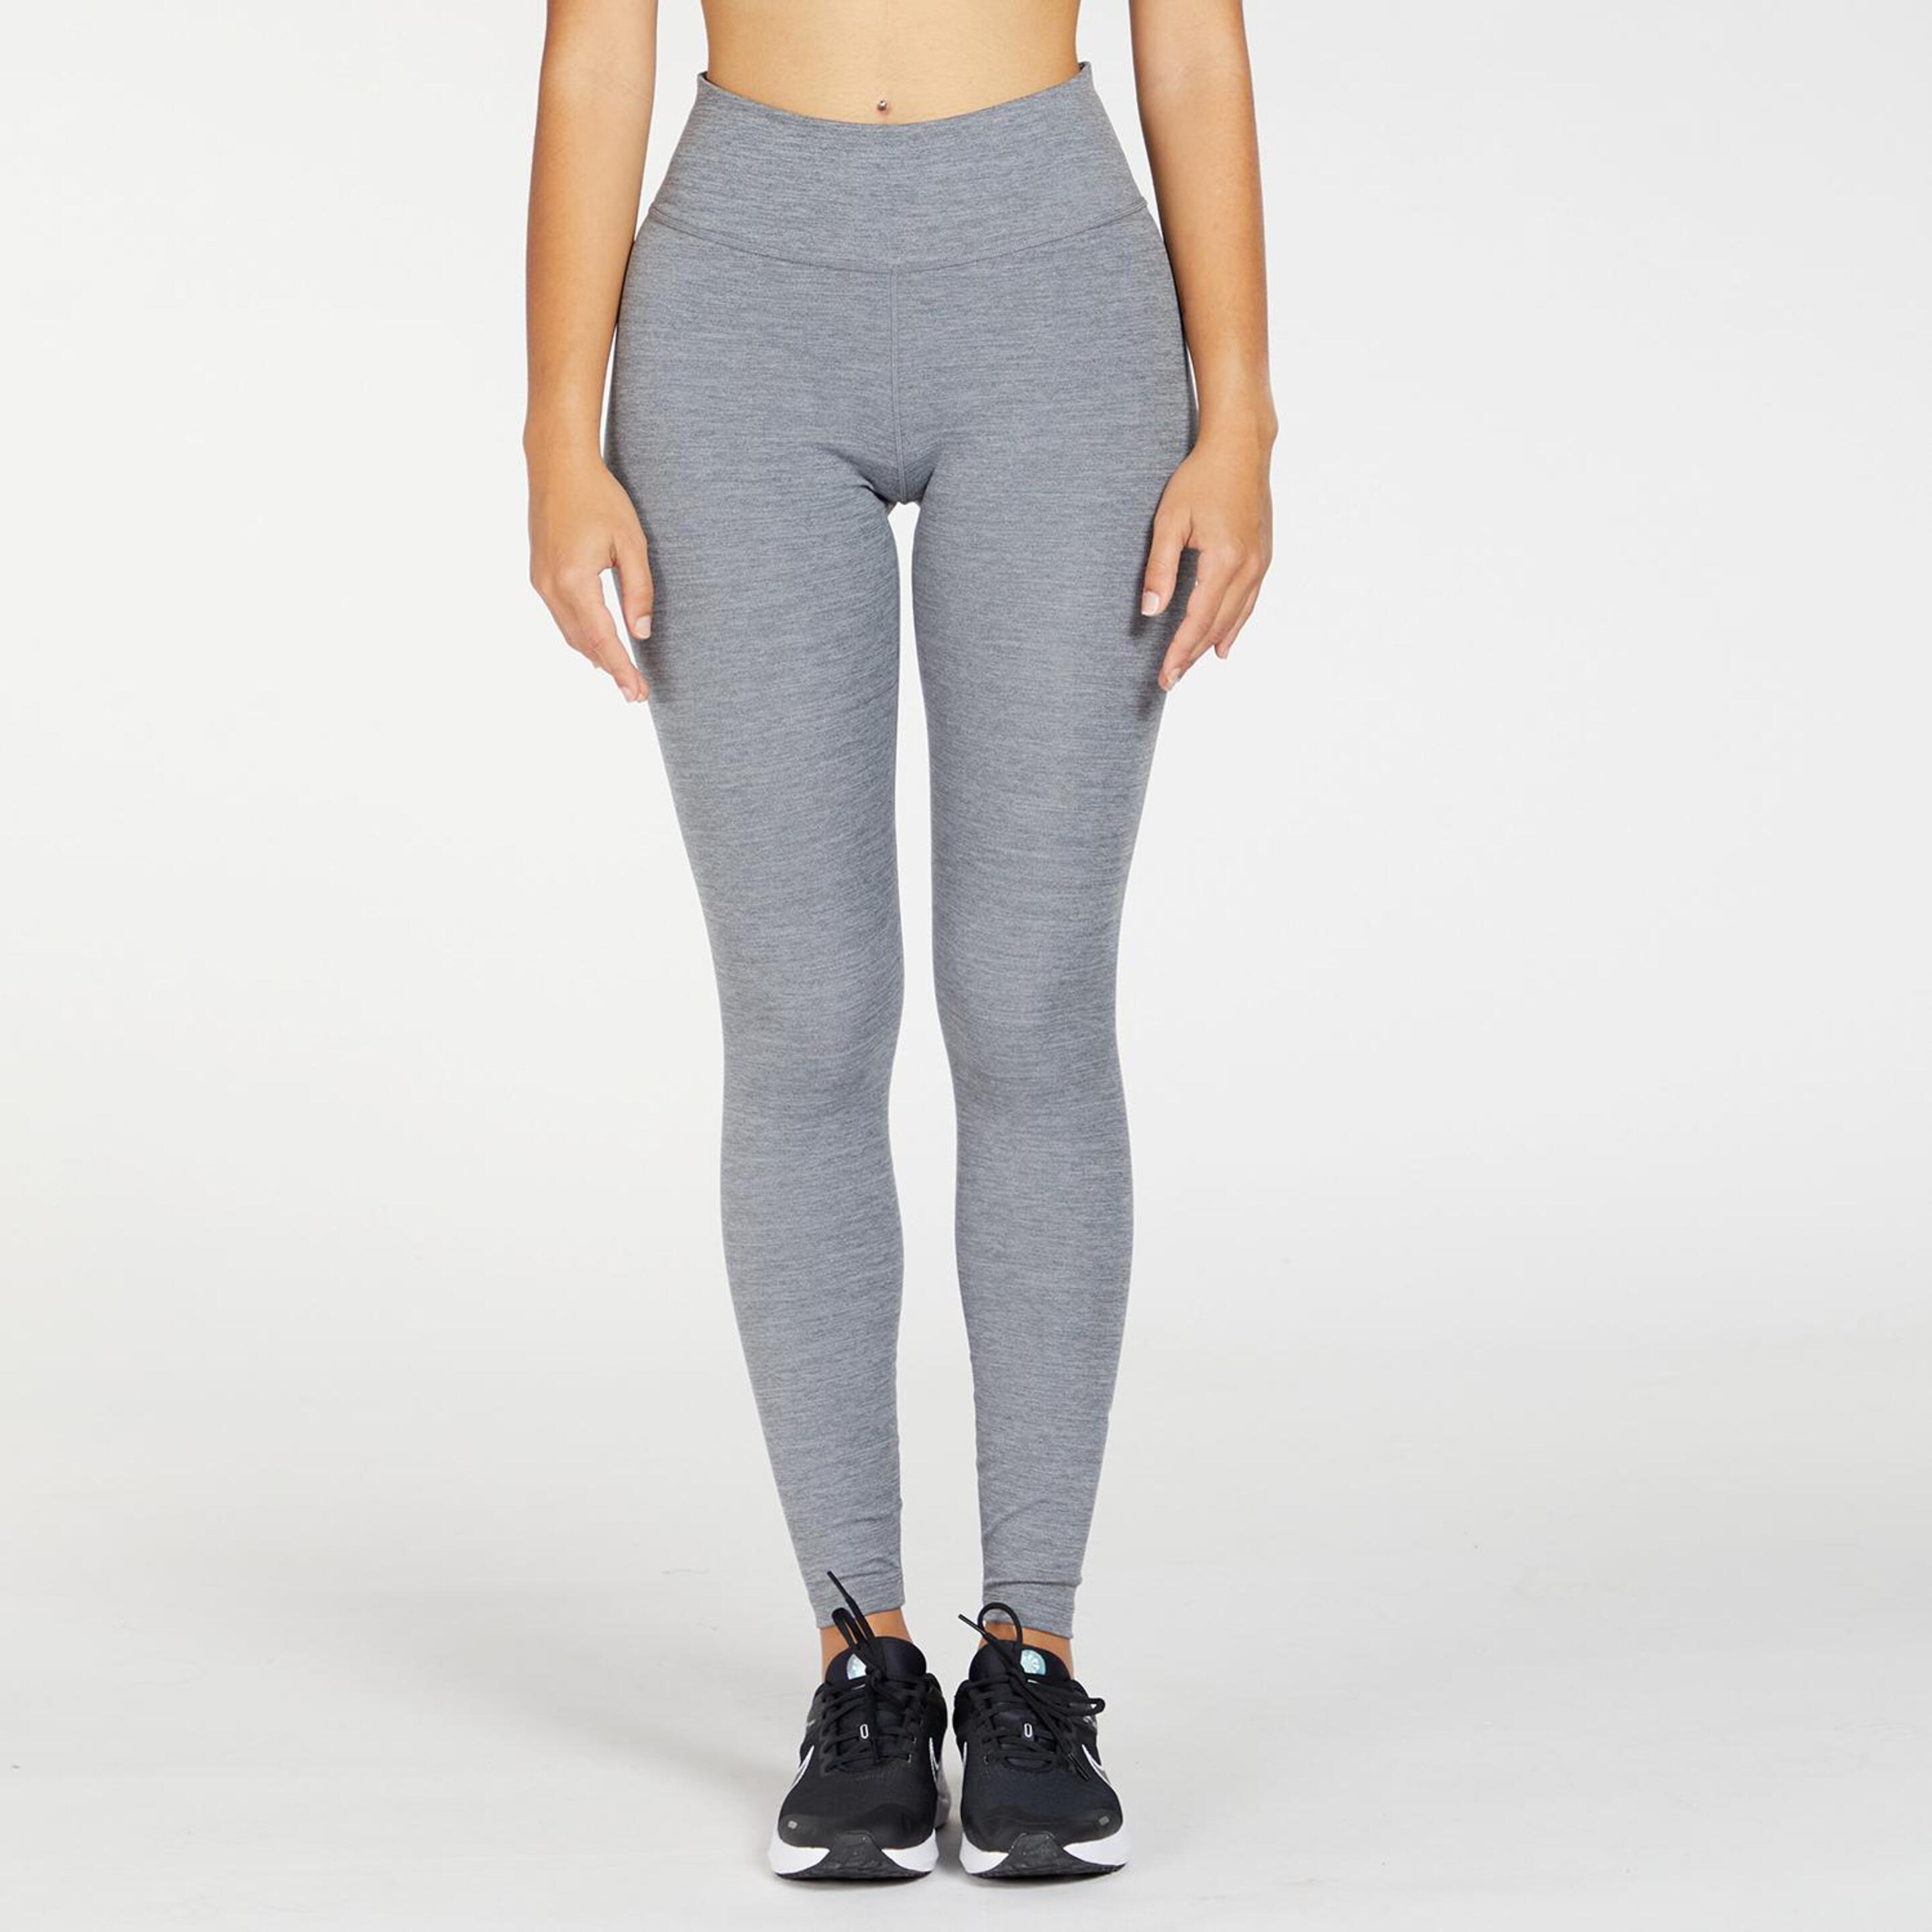 Nike Dri-fit One - gris - Mallas Running Mujer